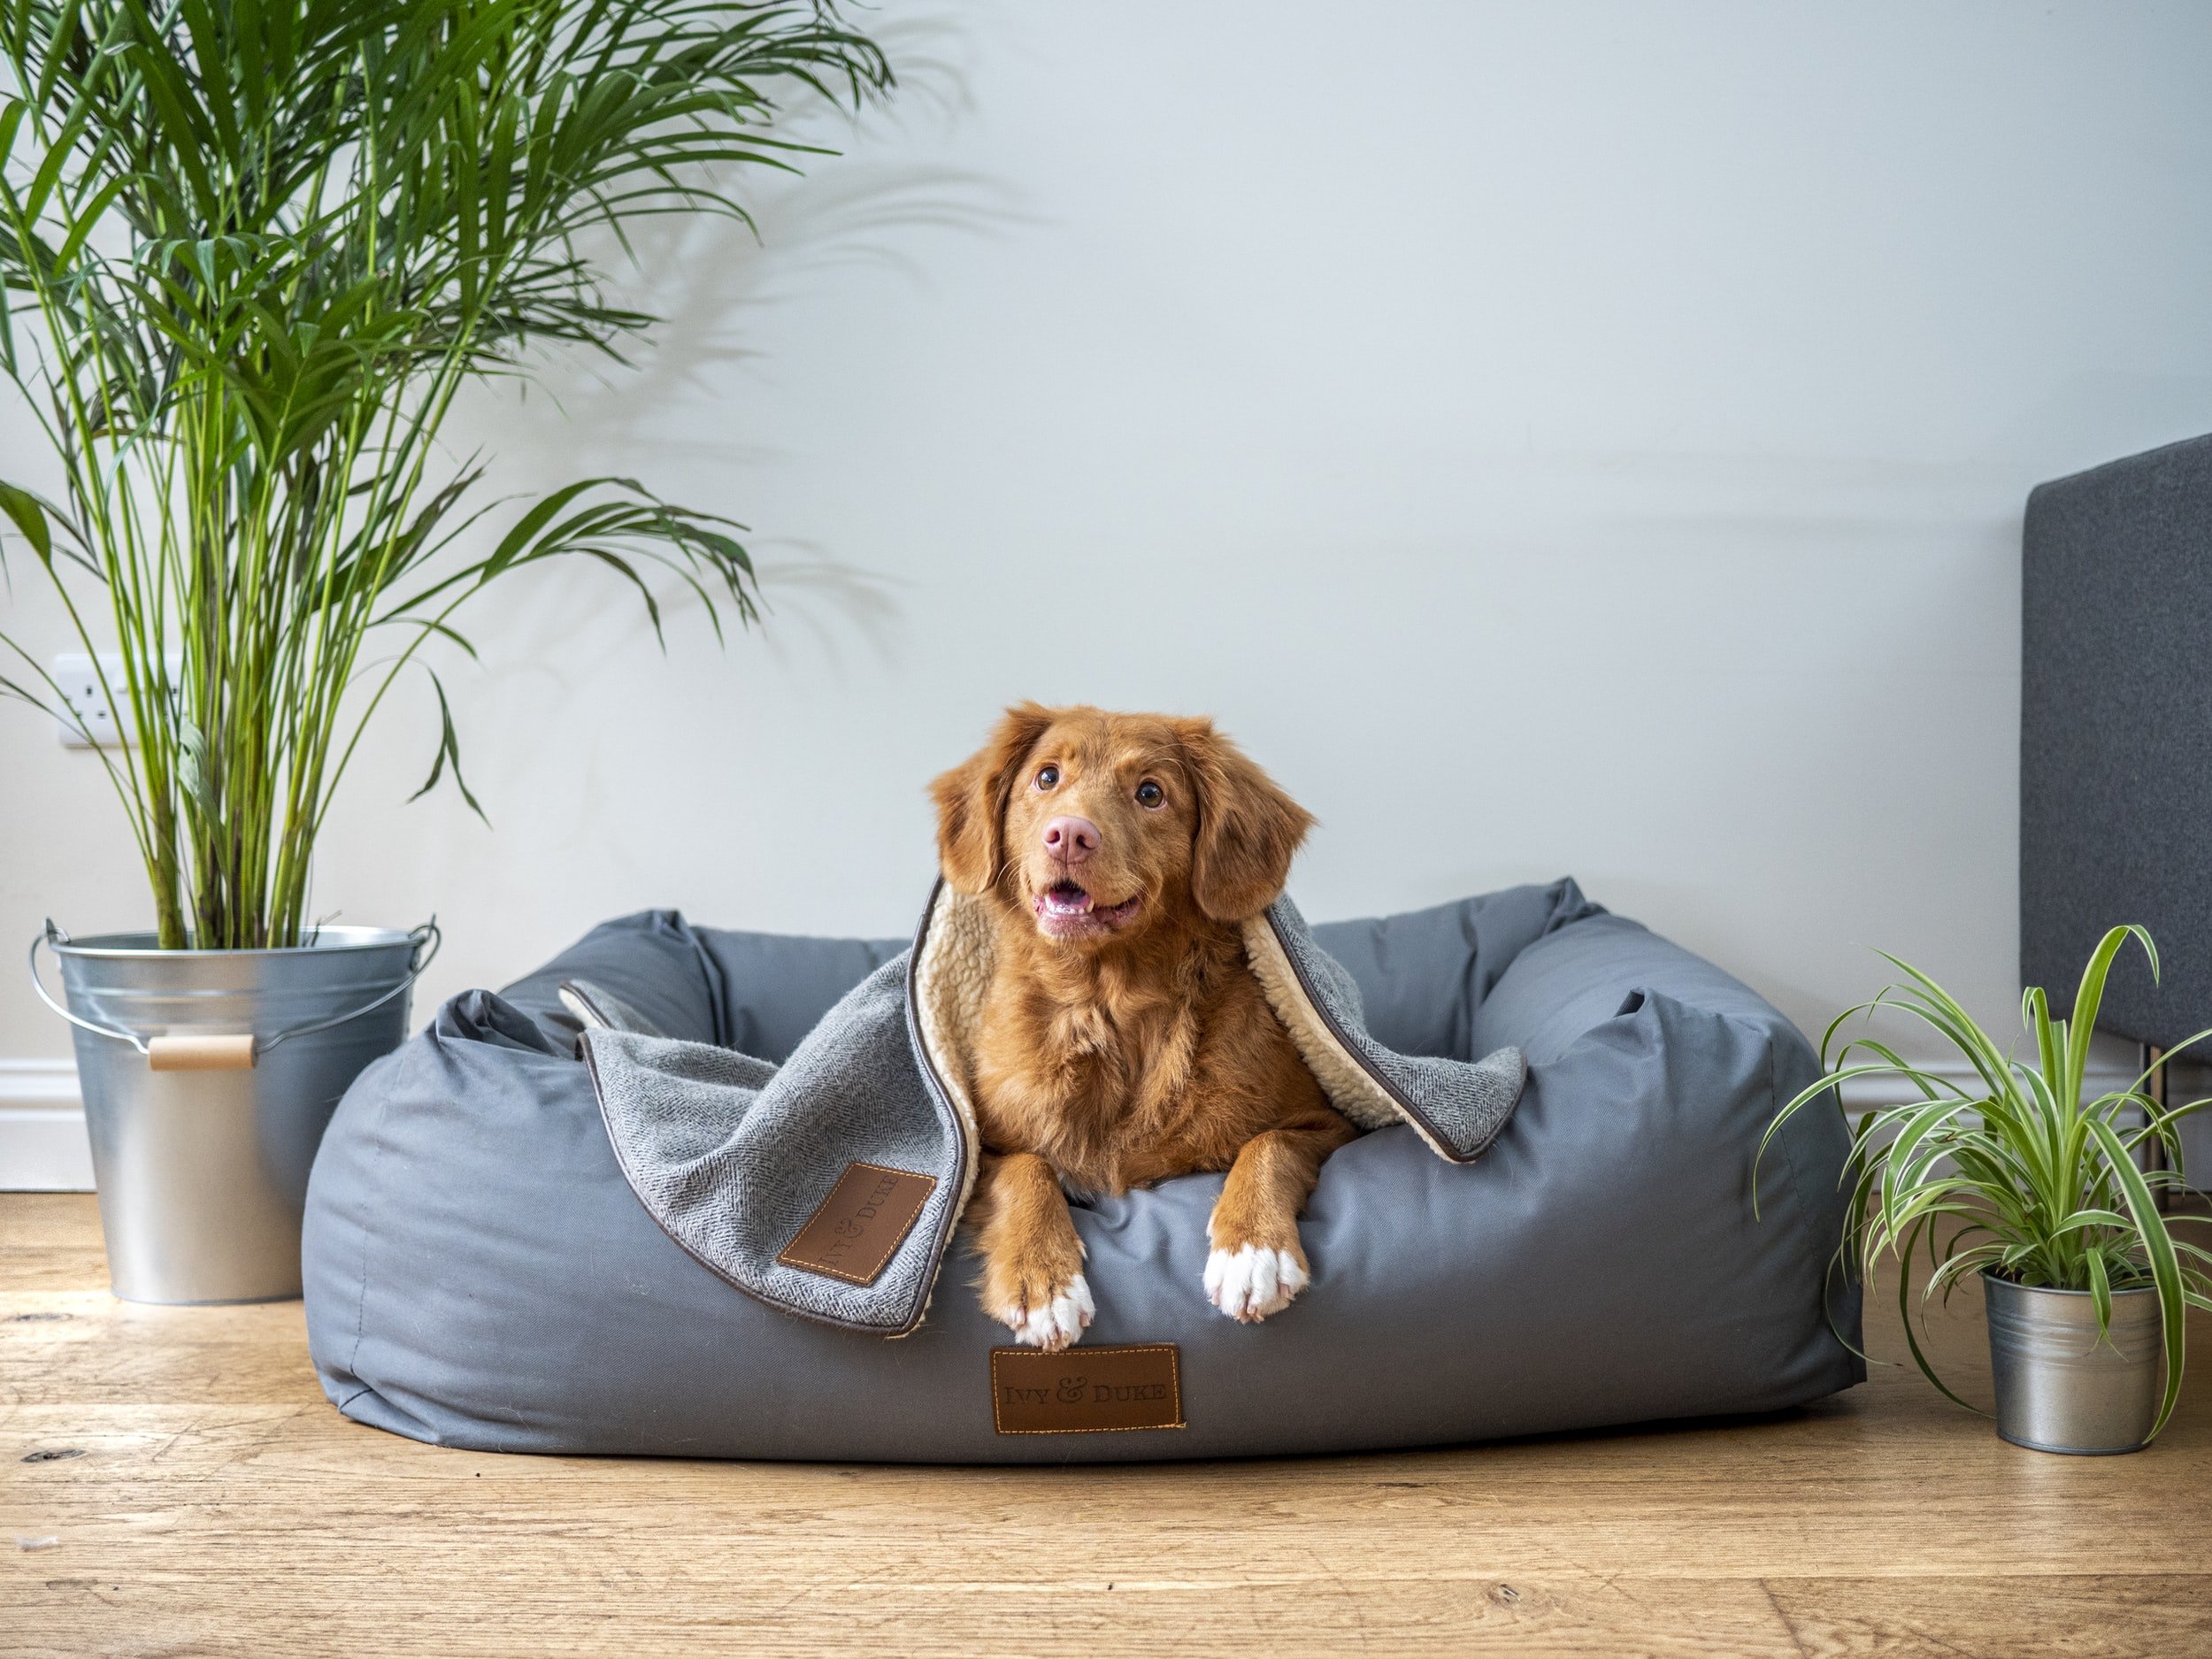 Dog lying in pet bed surrounded by plants